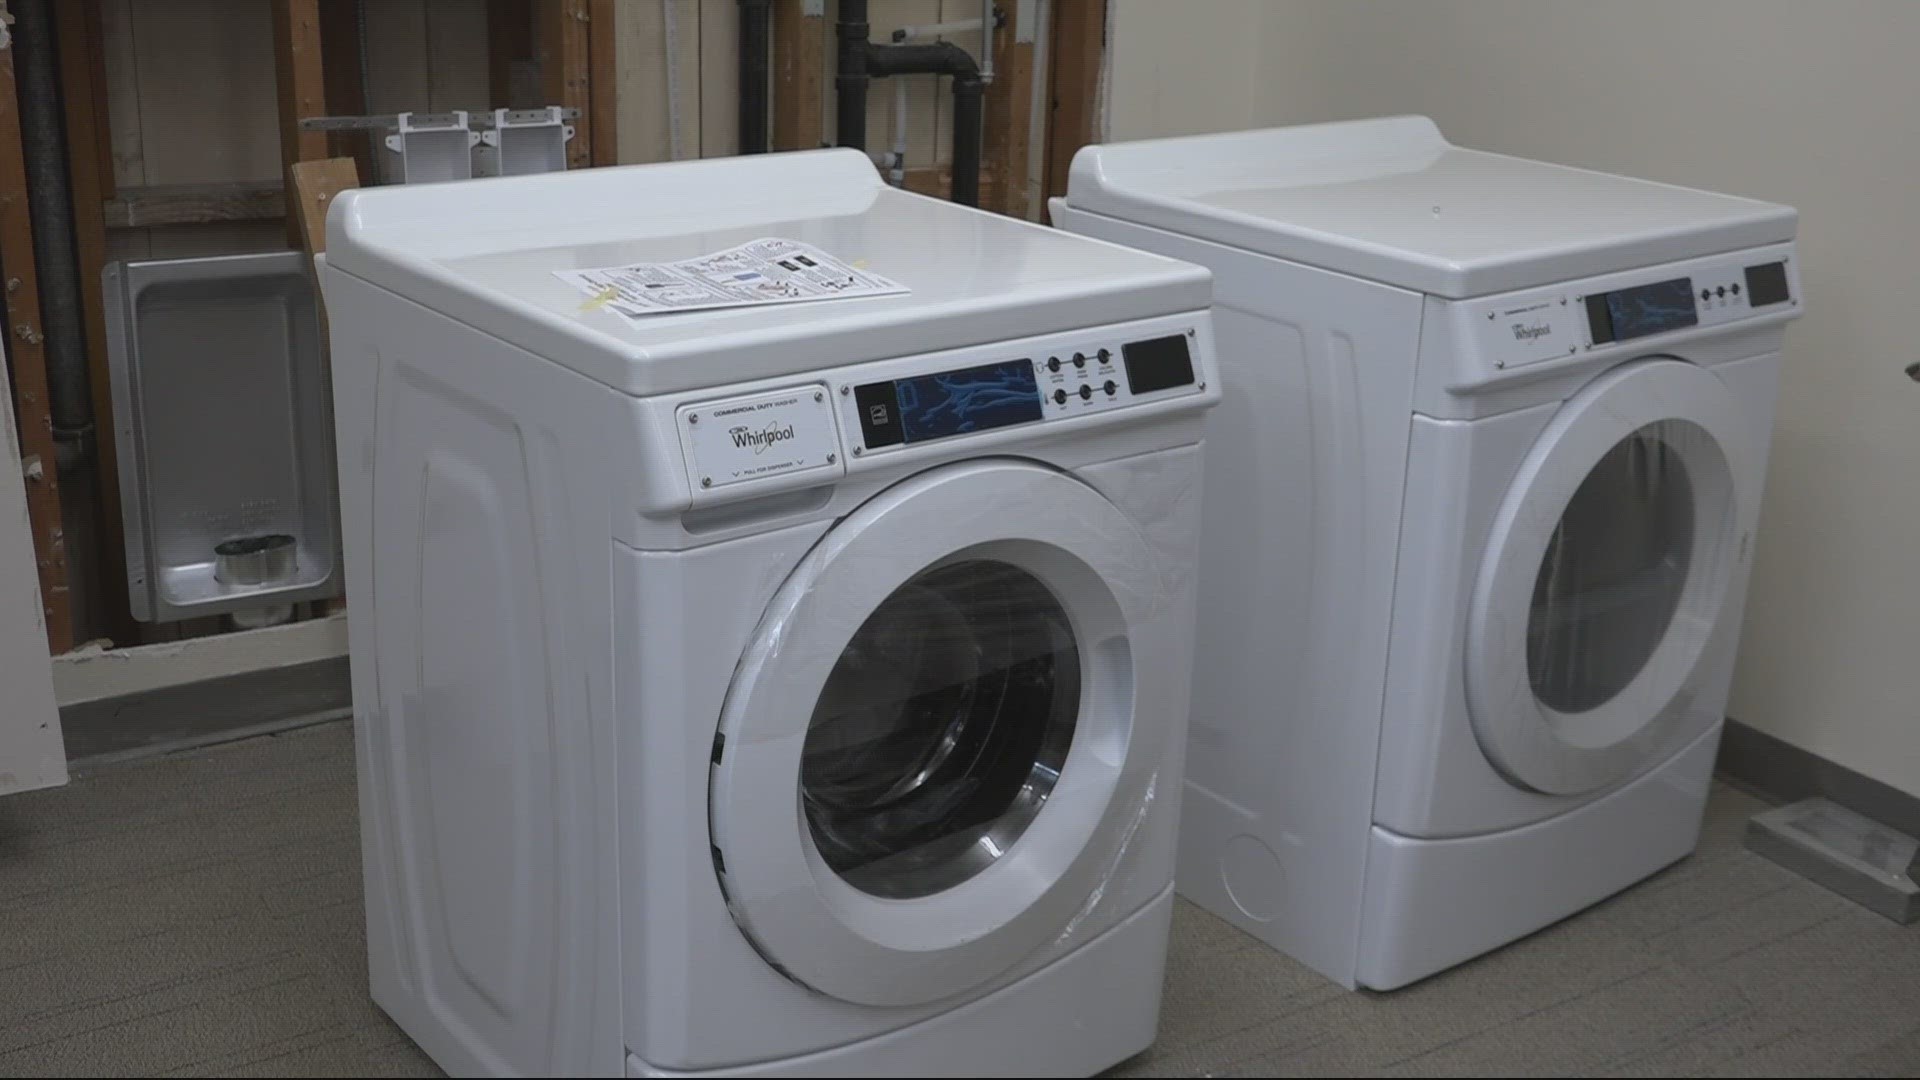 In a partnership between Whirlpool and Teach for America, Prescott Elementary School will receive a washer and dryers for families to use.